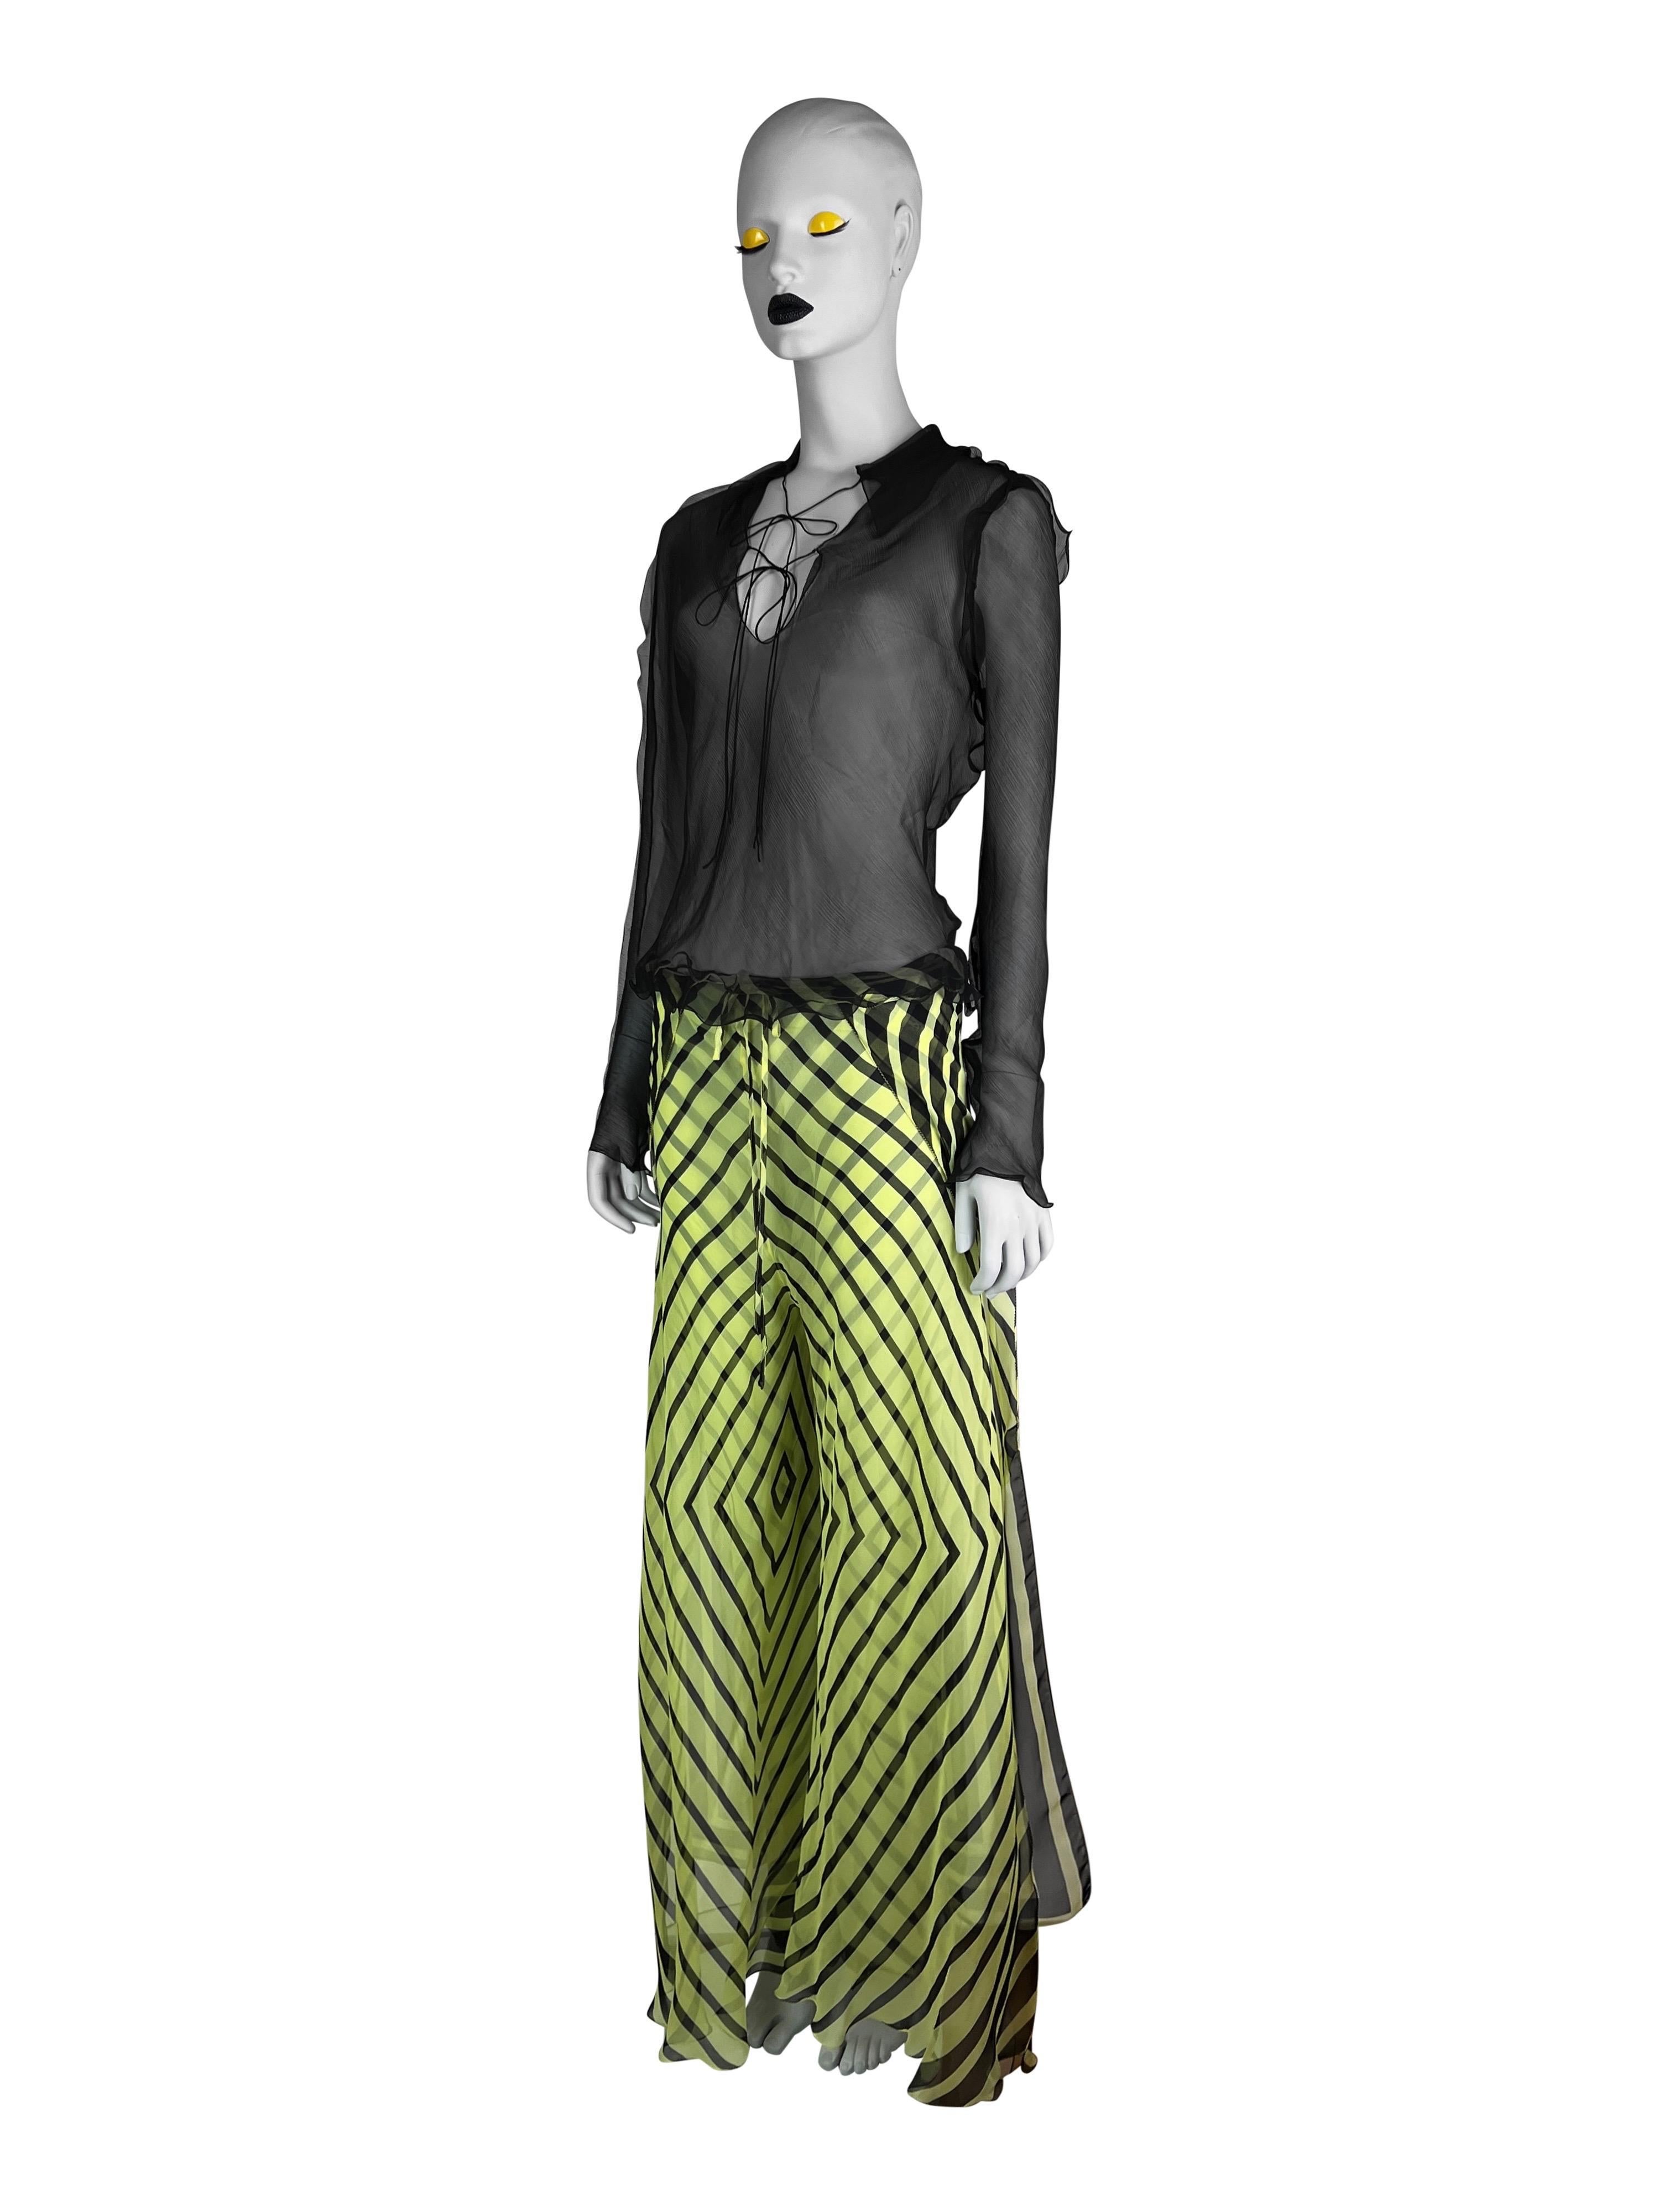 Women's Fendi by Karl Lagerfeld Spring 2000 Doubled Layered Graphic Lime Bias-Cut Silk T For Sale